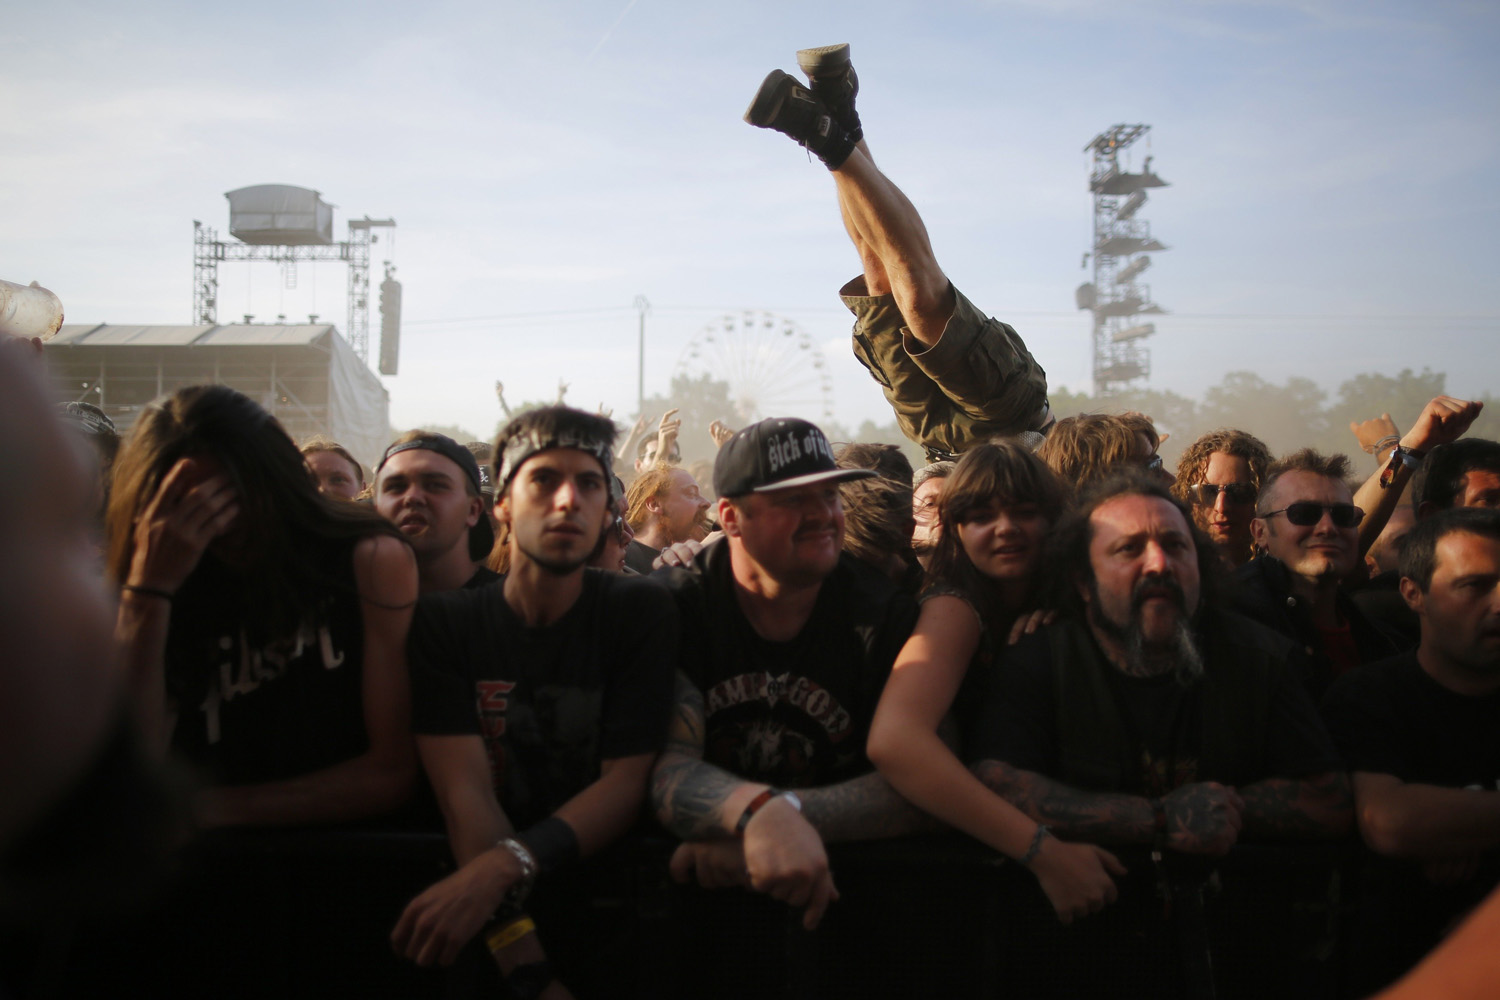 Festival-goers react during the Hellfest music Festival in Clisson, western France on June 20, 2014.